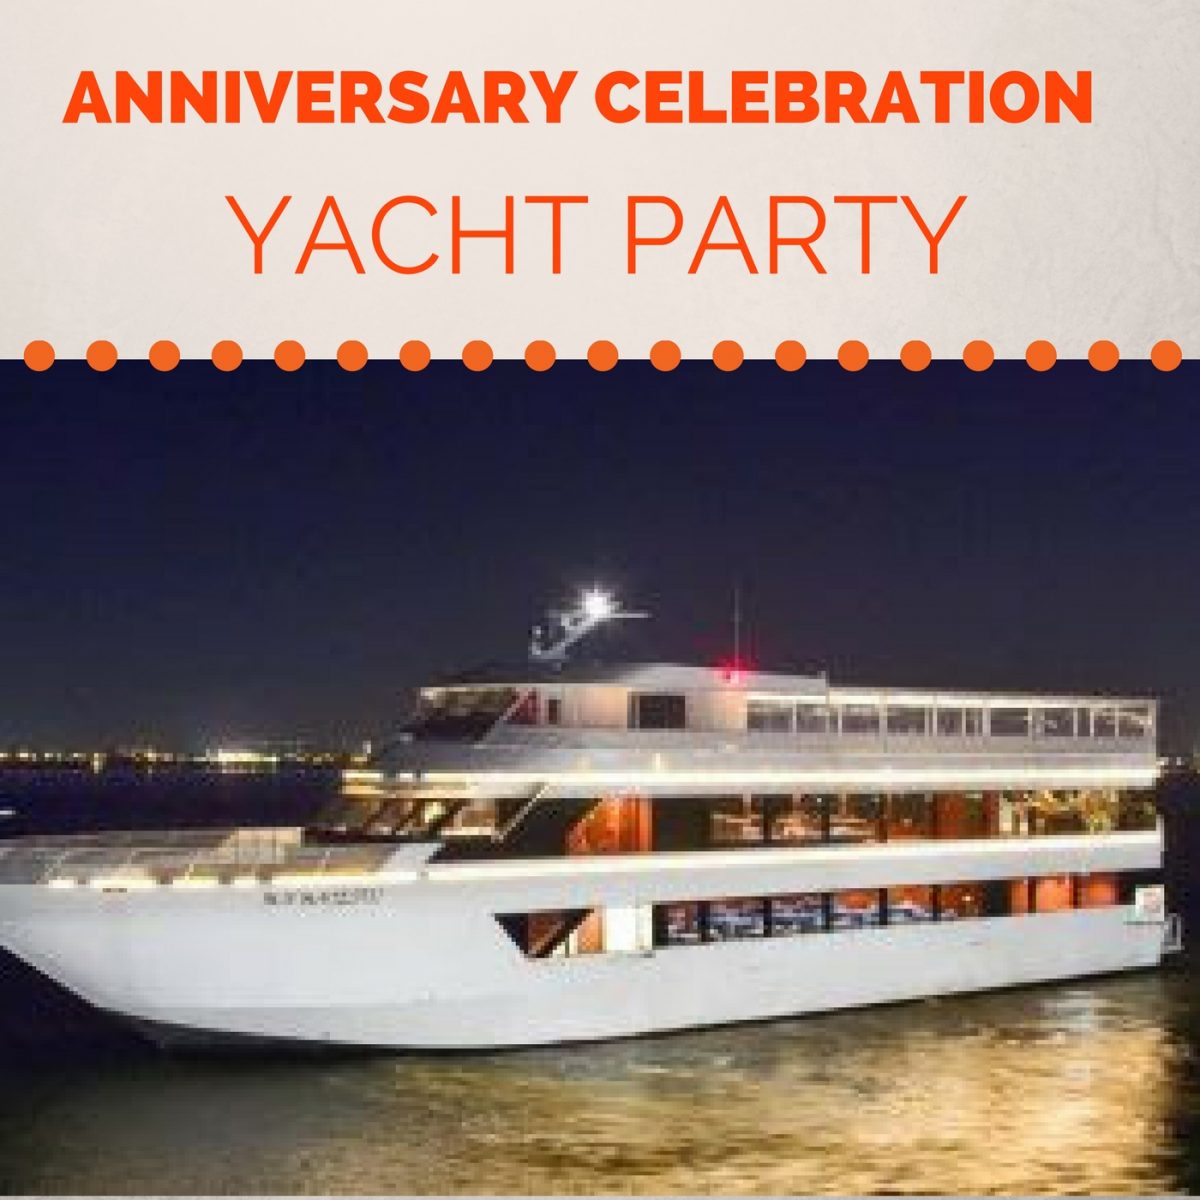 A Grand Anniversary Party on a Yacht charter